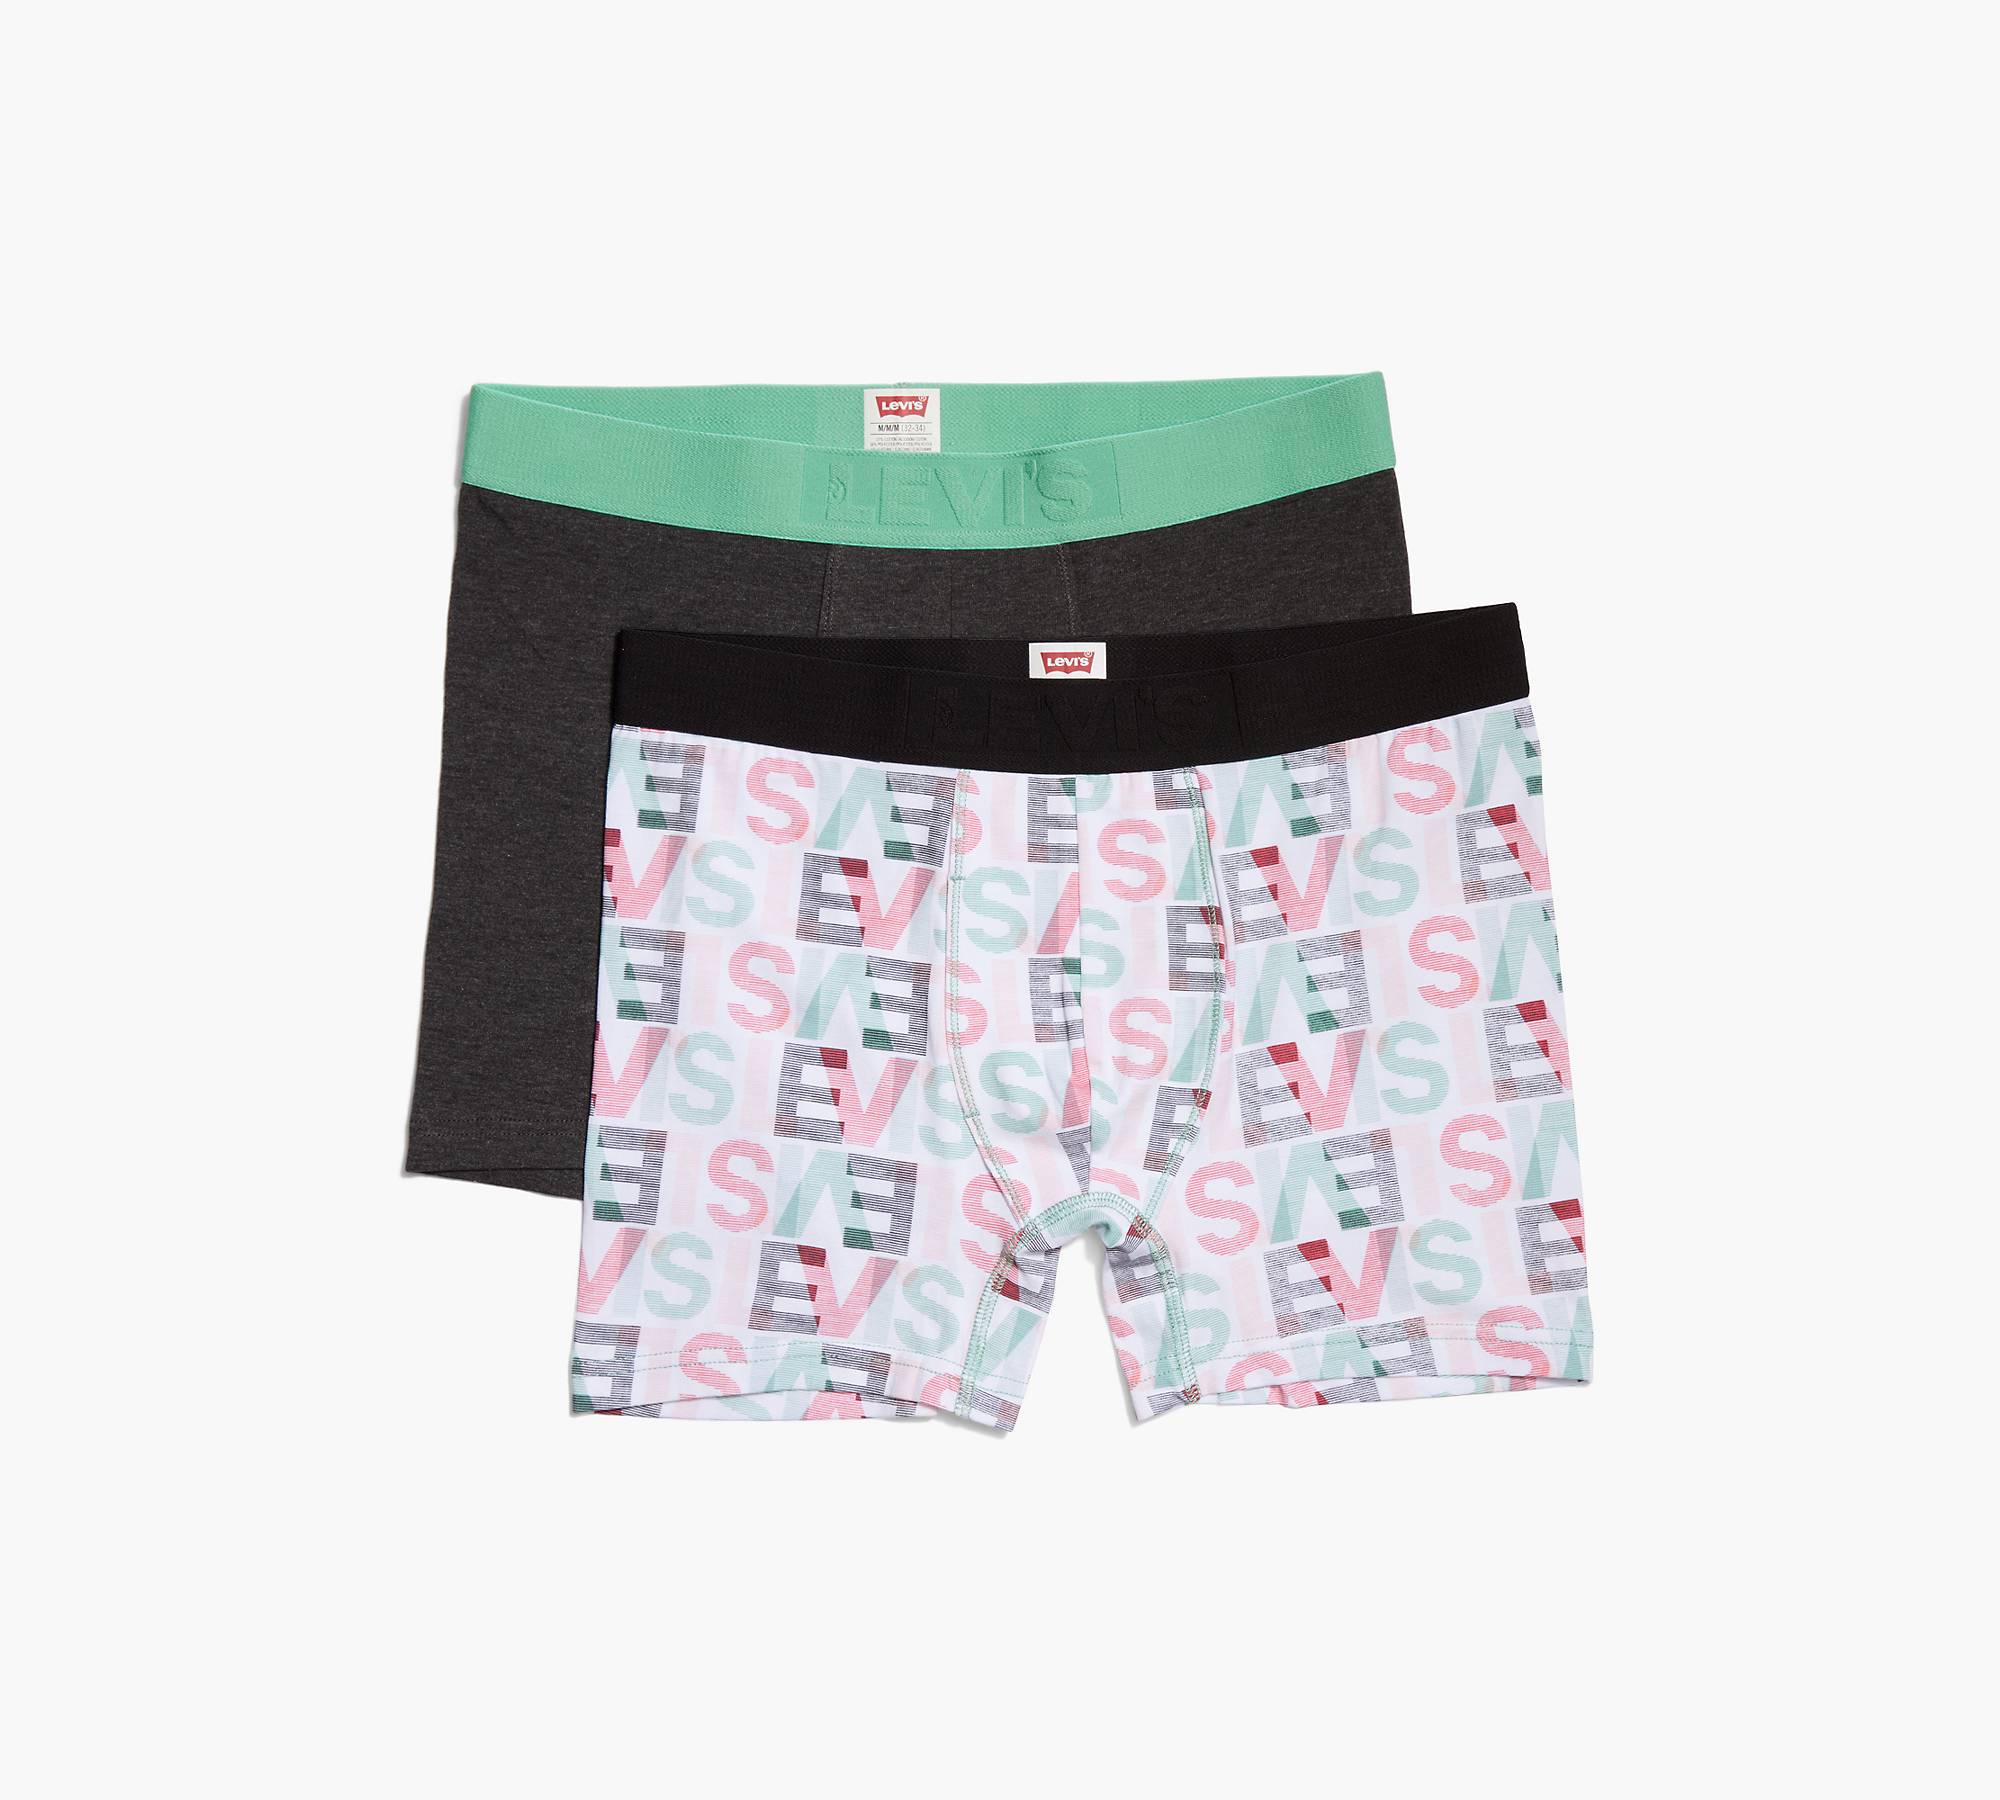 Levi’s® 2-Pack Printed Boxer Briefs 1